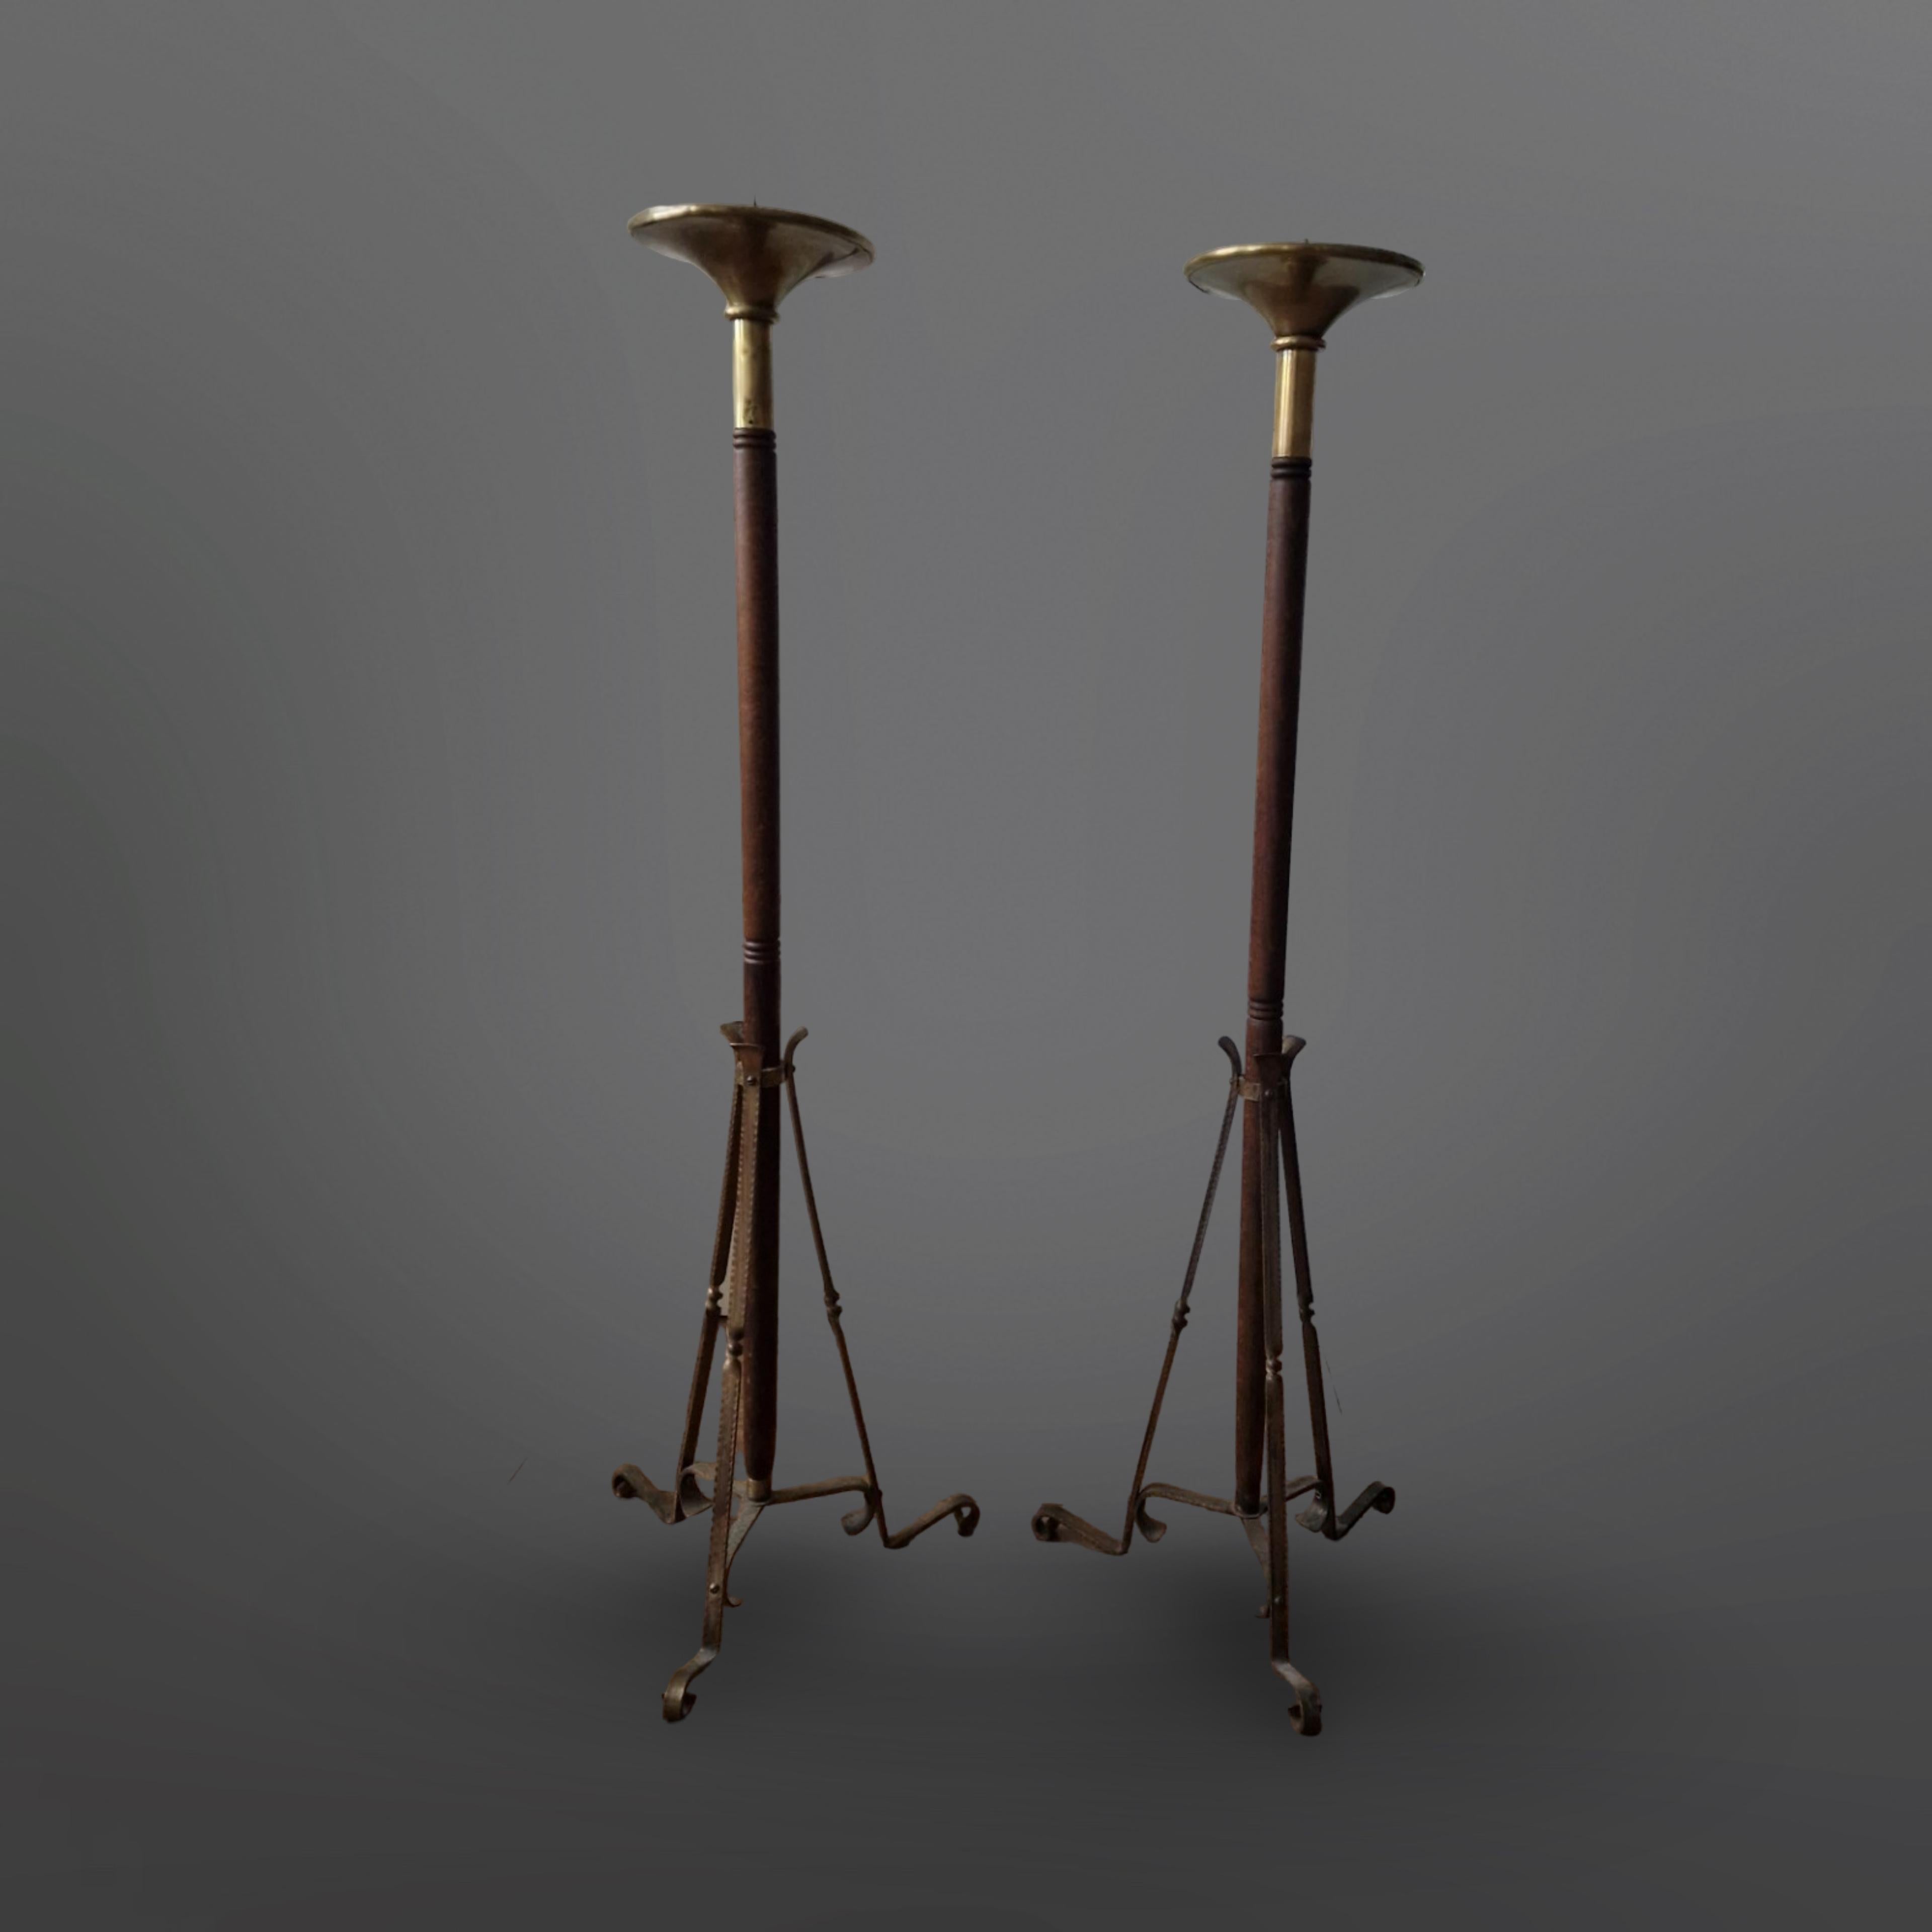 Set of 2 floor standing candle holders. Made from wood and brass. They came from a monastery in Oirschot Netherlands

The bases are made from wrought brass. The candle holders are made from wood with a brass flared top. The candle holders were